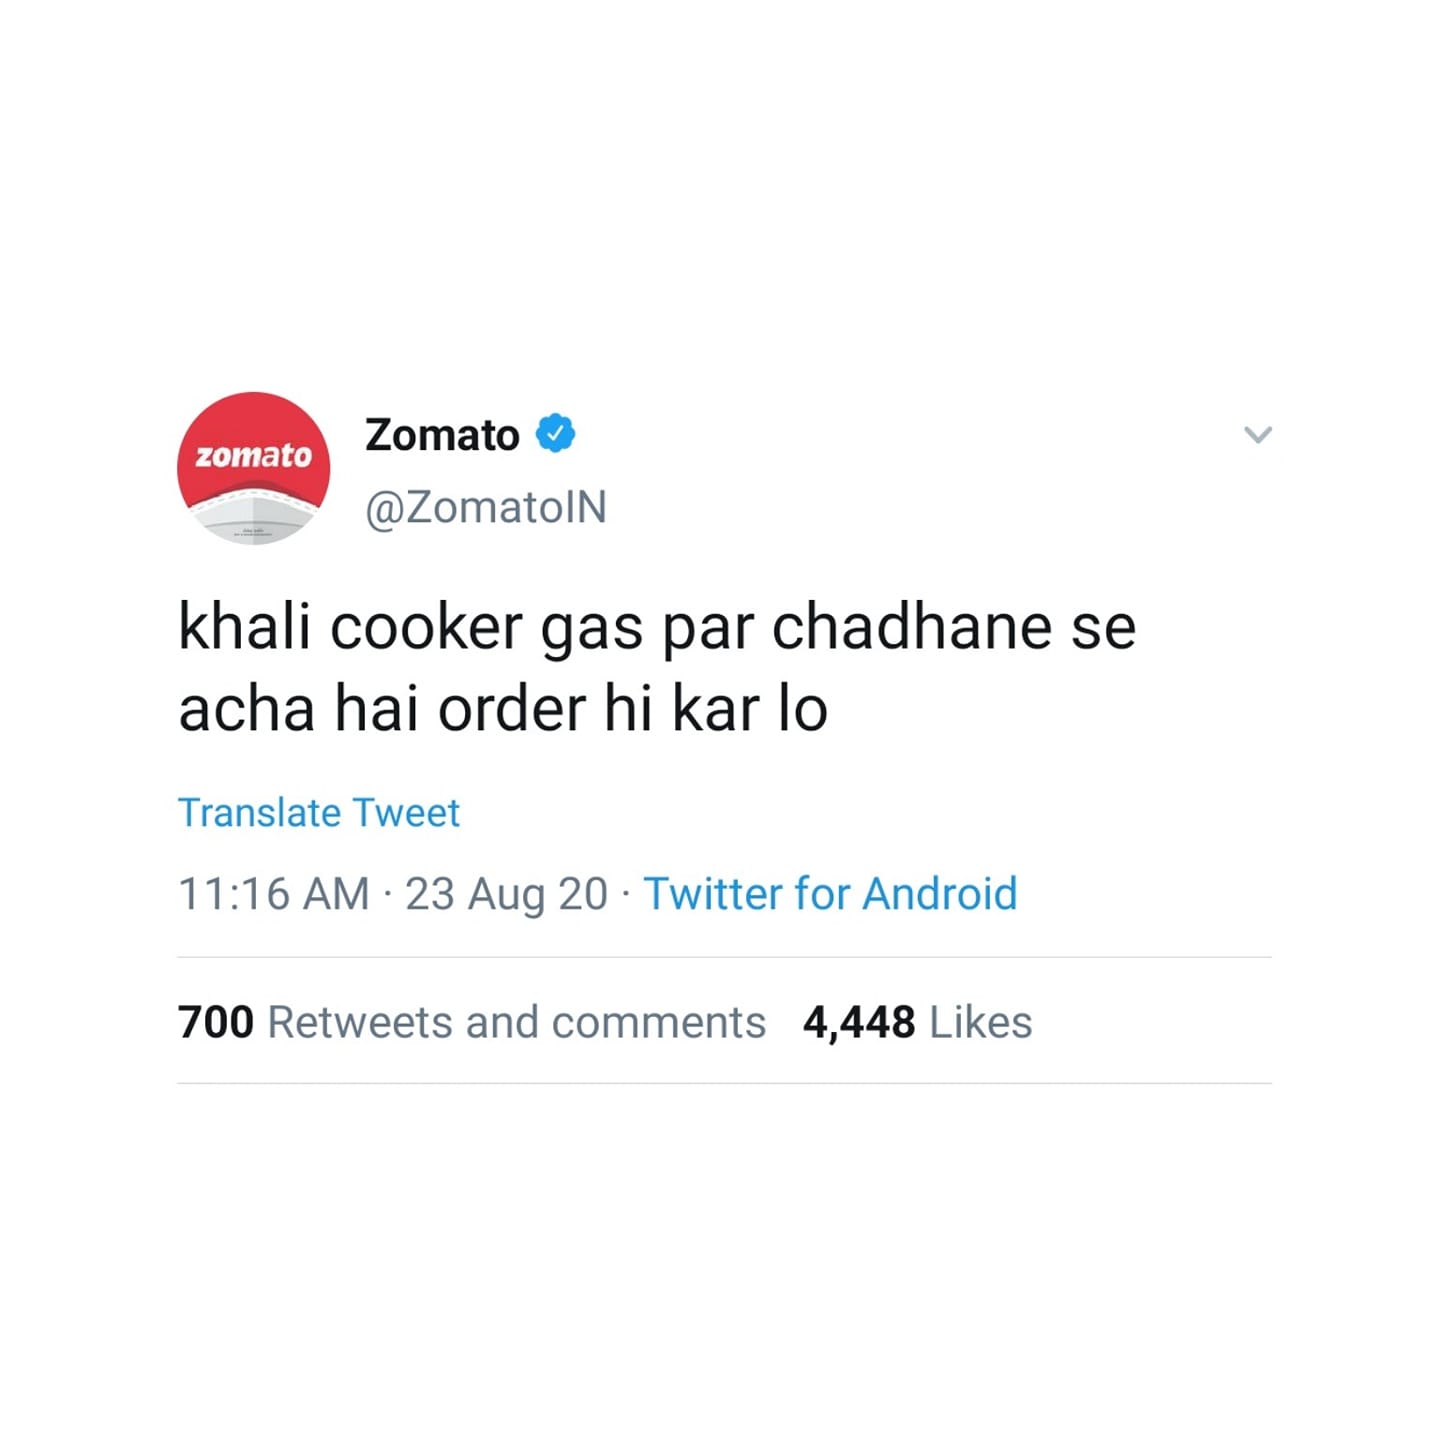 marketing strategy of zomato how they are winning hearts - Image 1